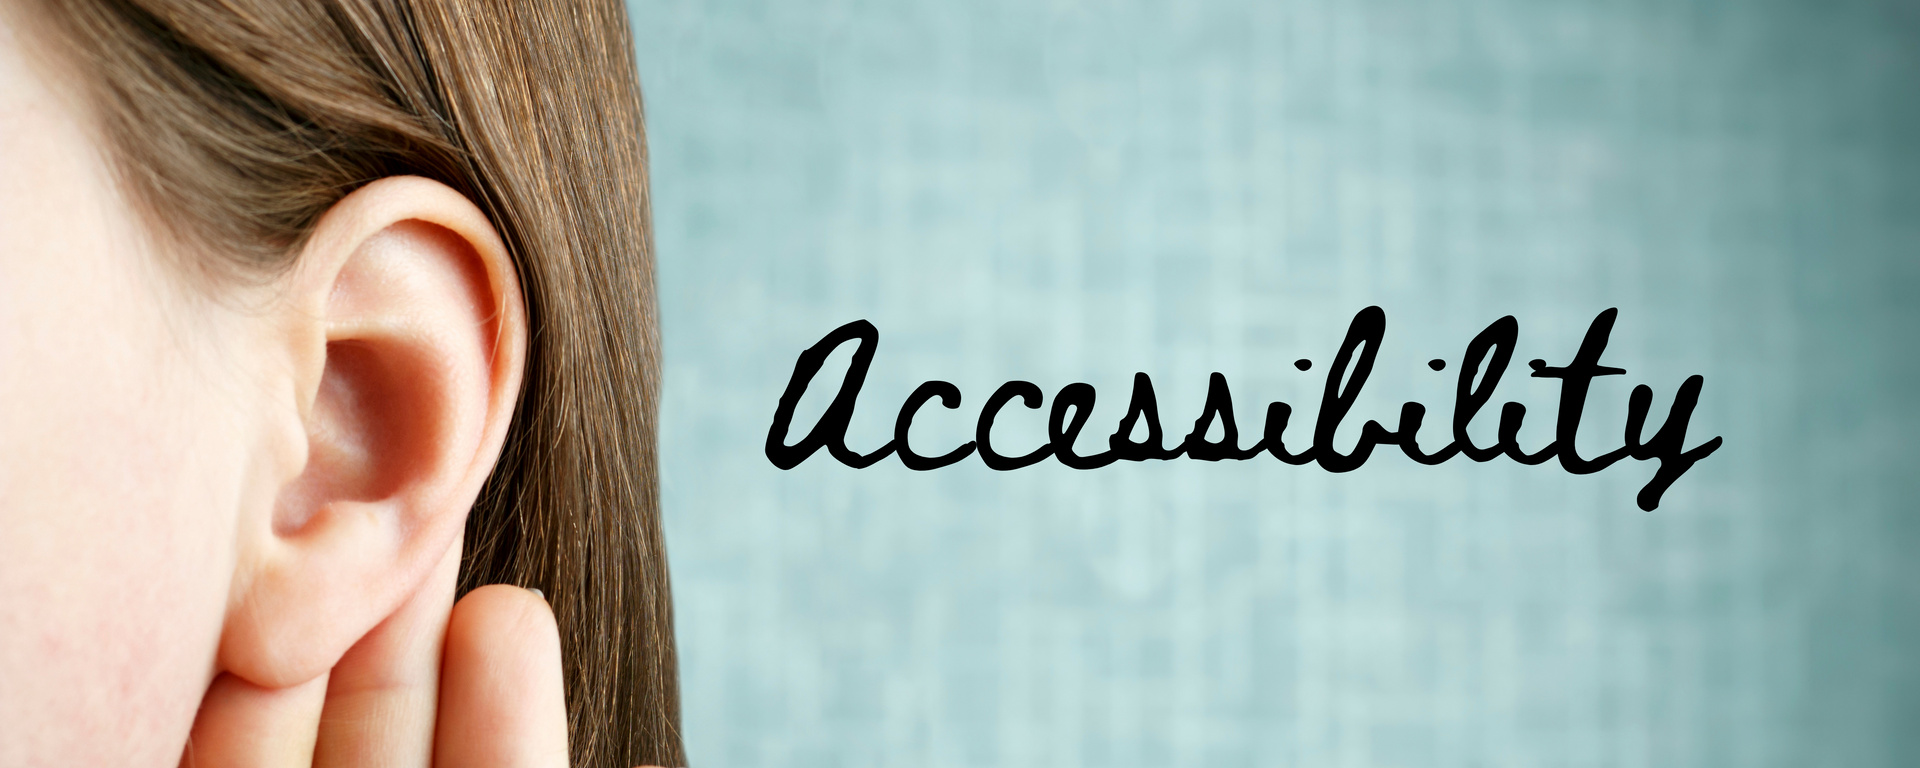 image of ear and word accessibility